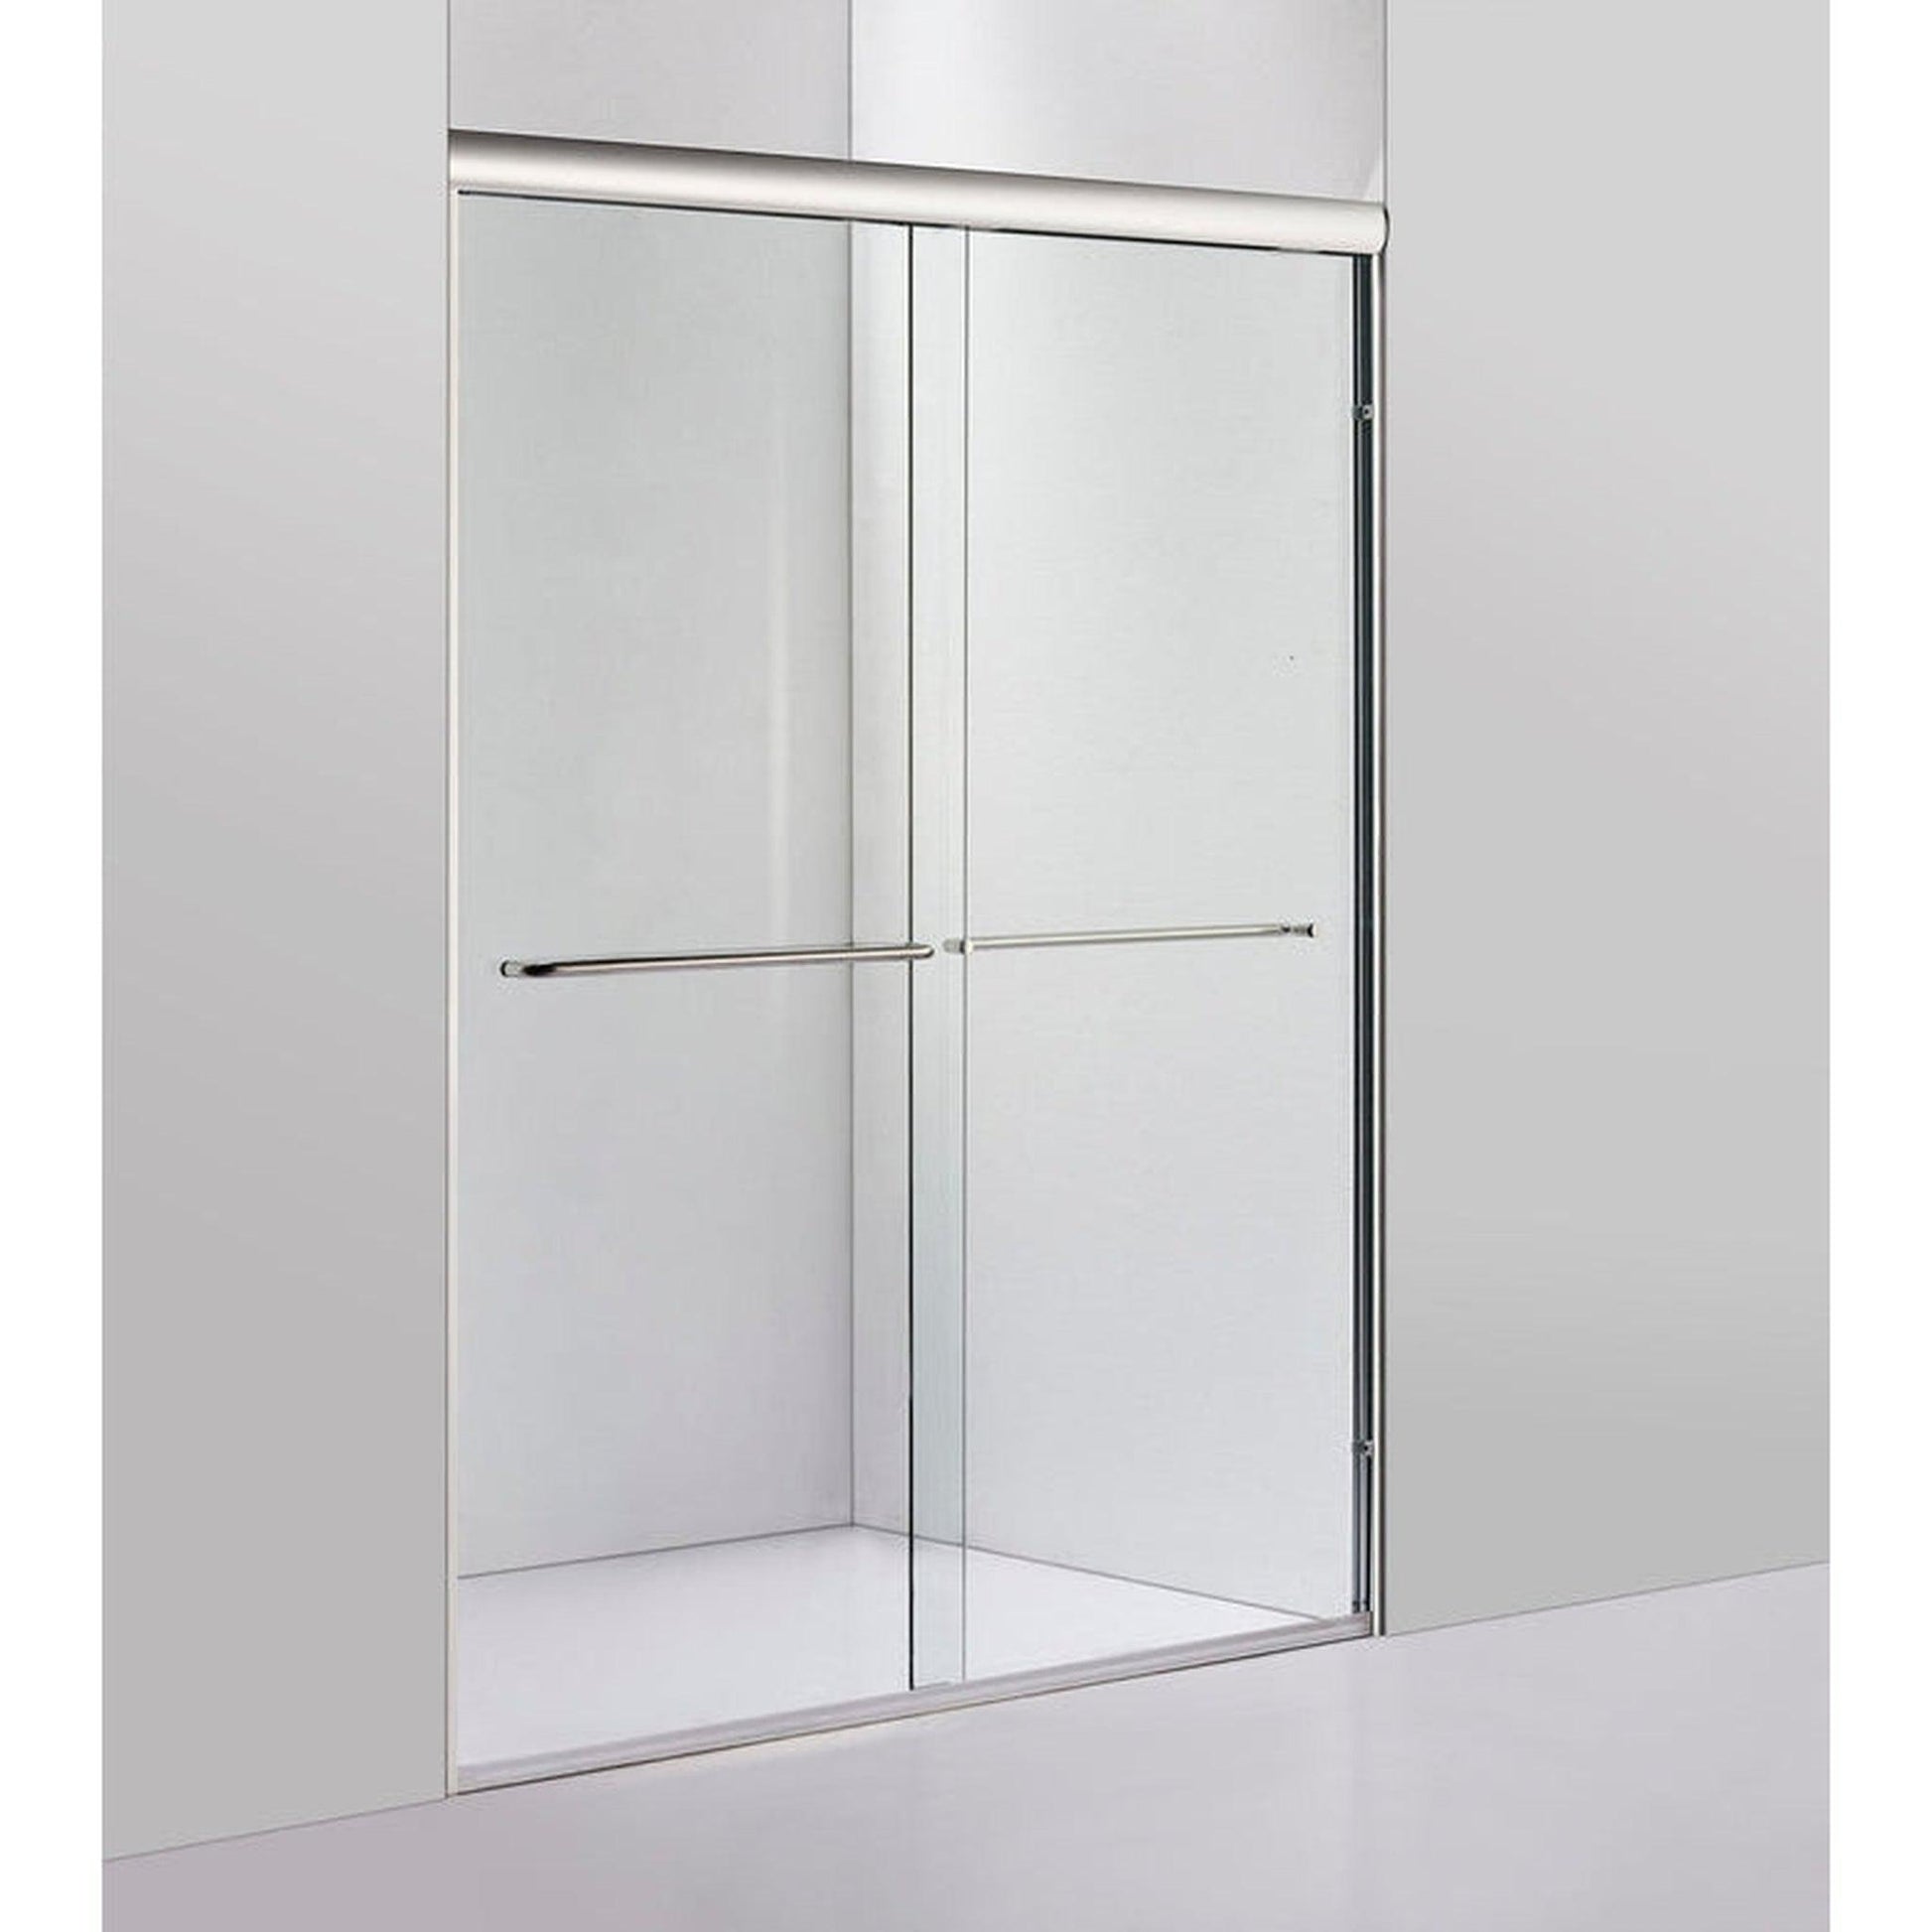 Vanity Art 76" H x 60" W Clear Tempered Glass Single Sliding Frameless Shower Door With Brushed Nickel Hardware